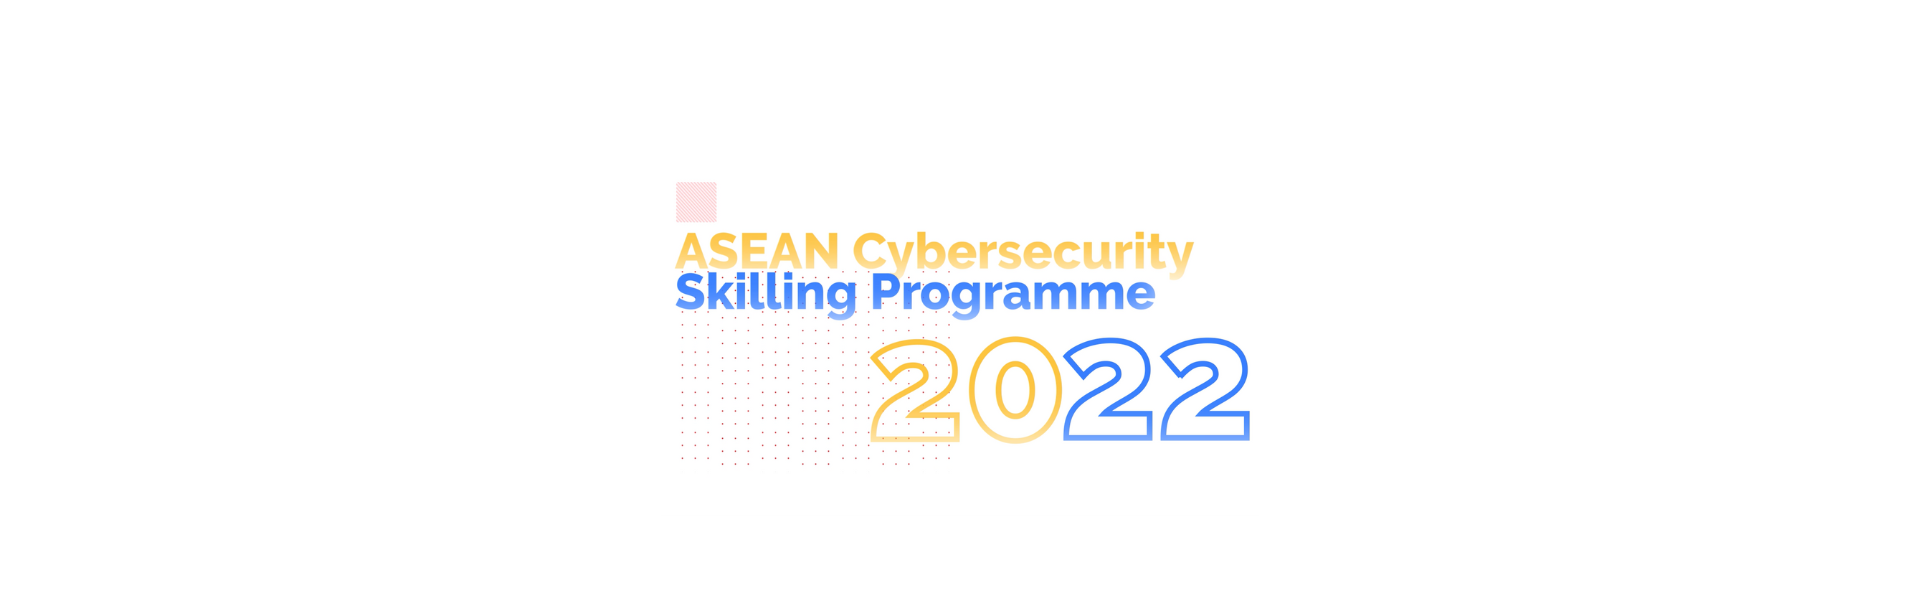 ASEAN Foundation Addresses the Threat of Cyber Insecurity through the Cybersecurity Skilling Program